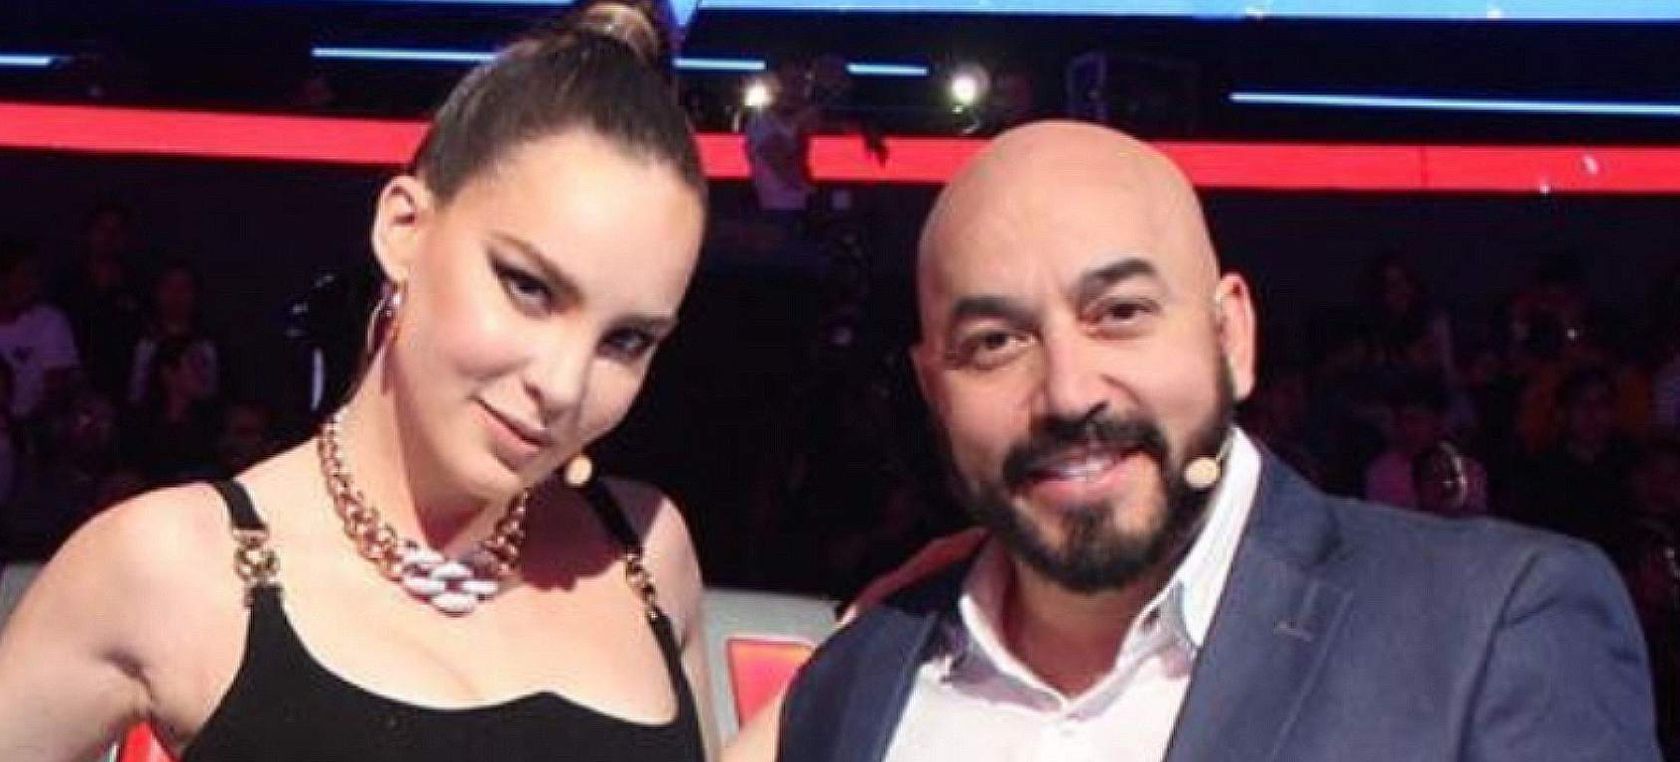 Lupillo Rivera finally makes up his mind and Belindas tattoo is erased